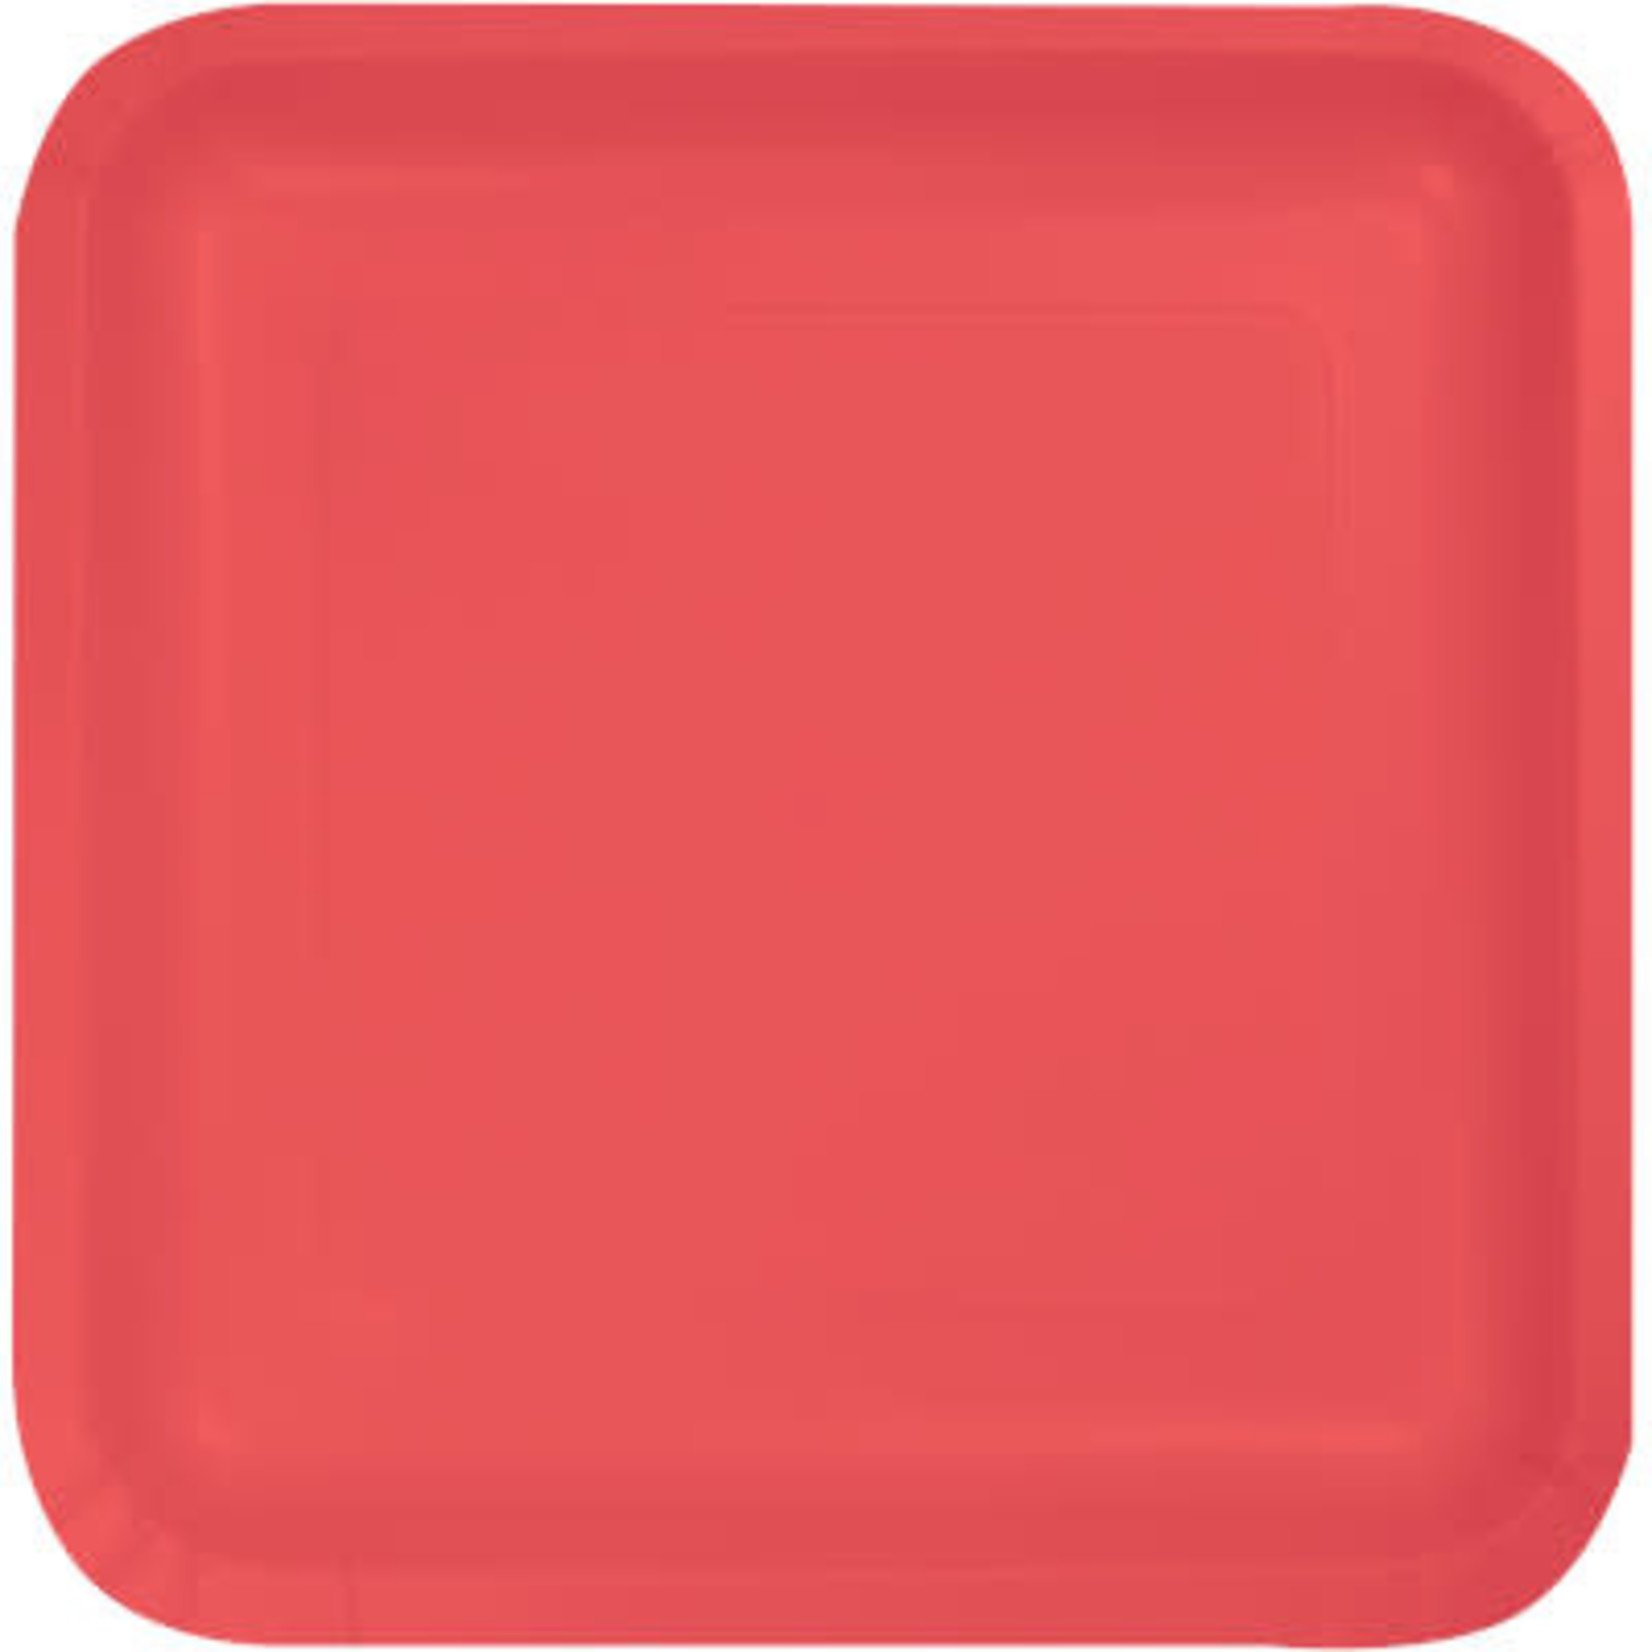 Touch of Color 9" Coral Square Paper Plates - 18ct.